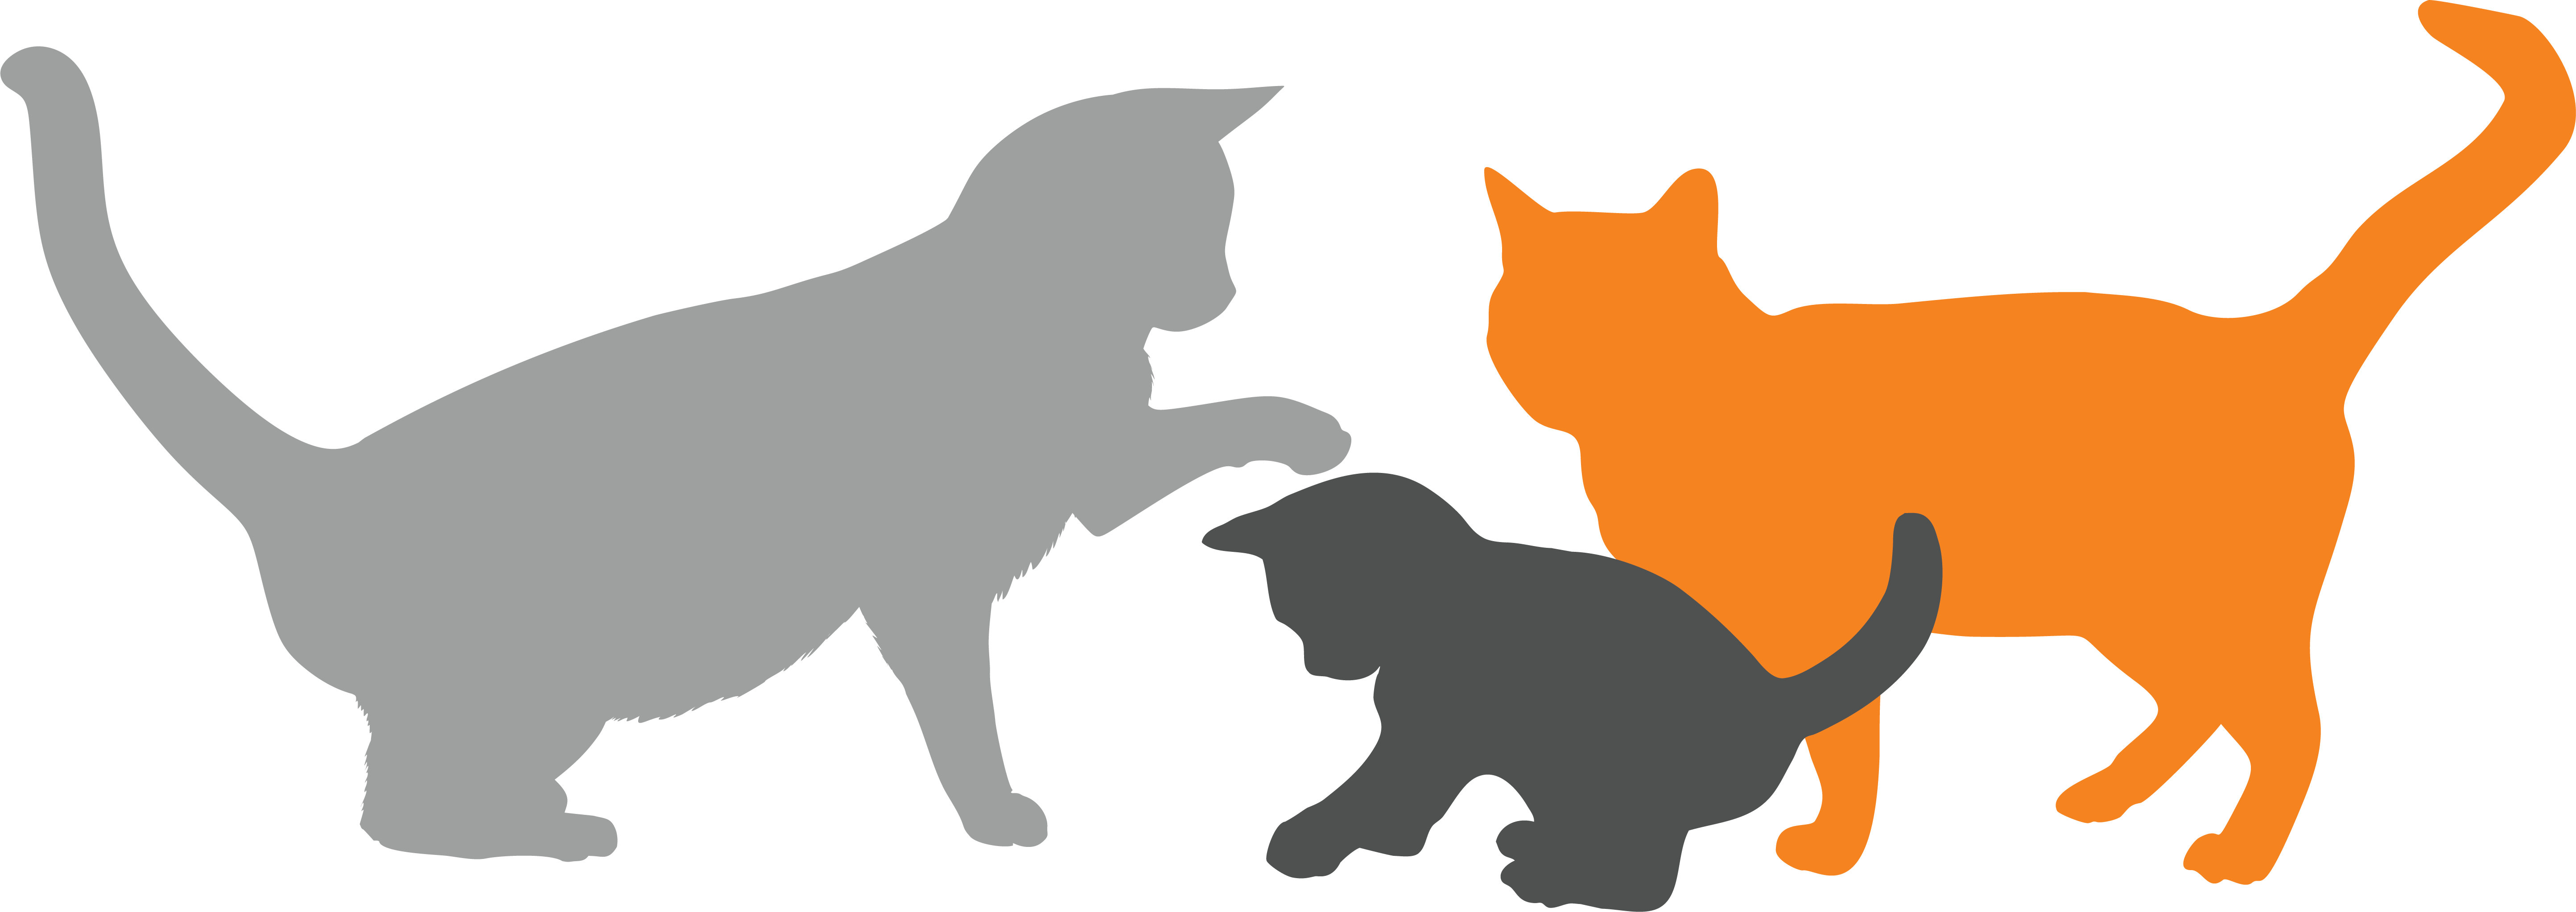 Three cats in silhouette graphic